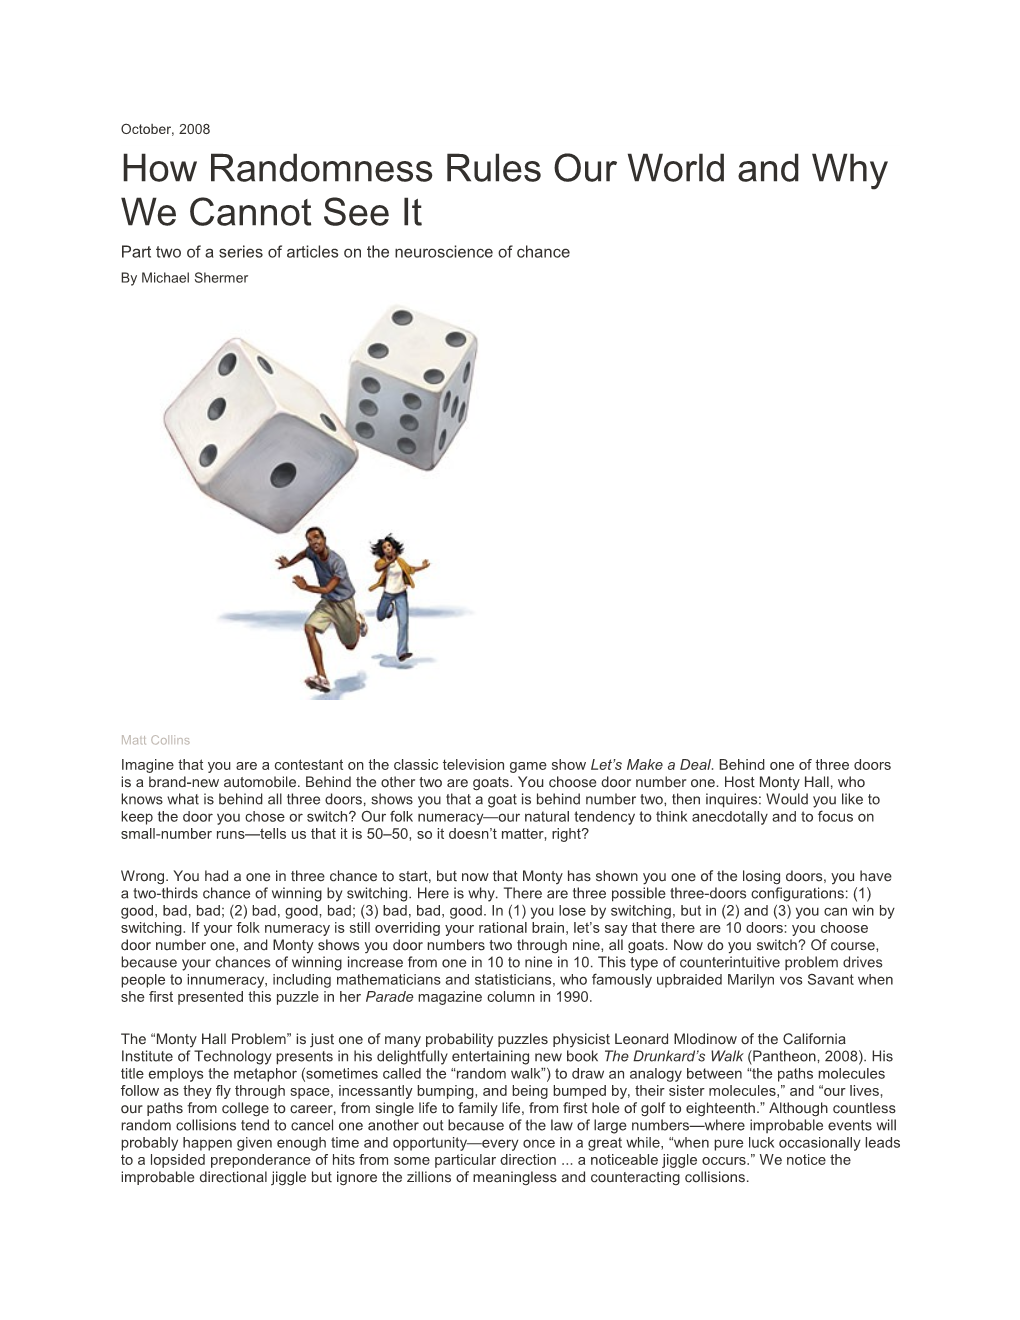 How Randomness Rules Our World and Why We Cannot See It